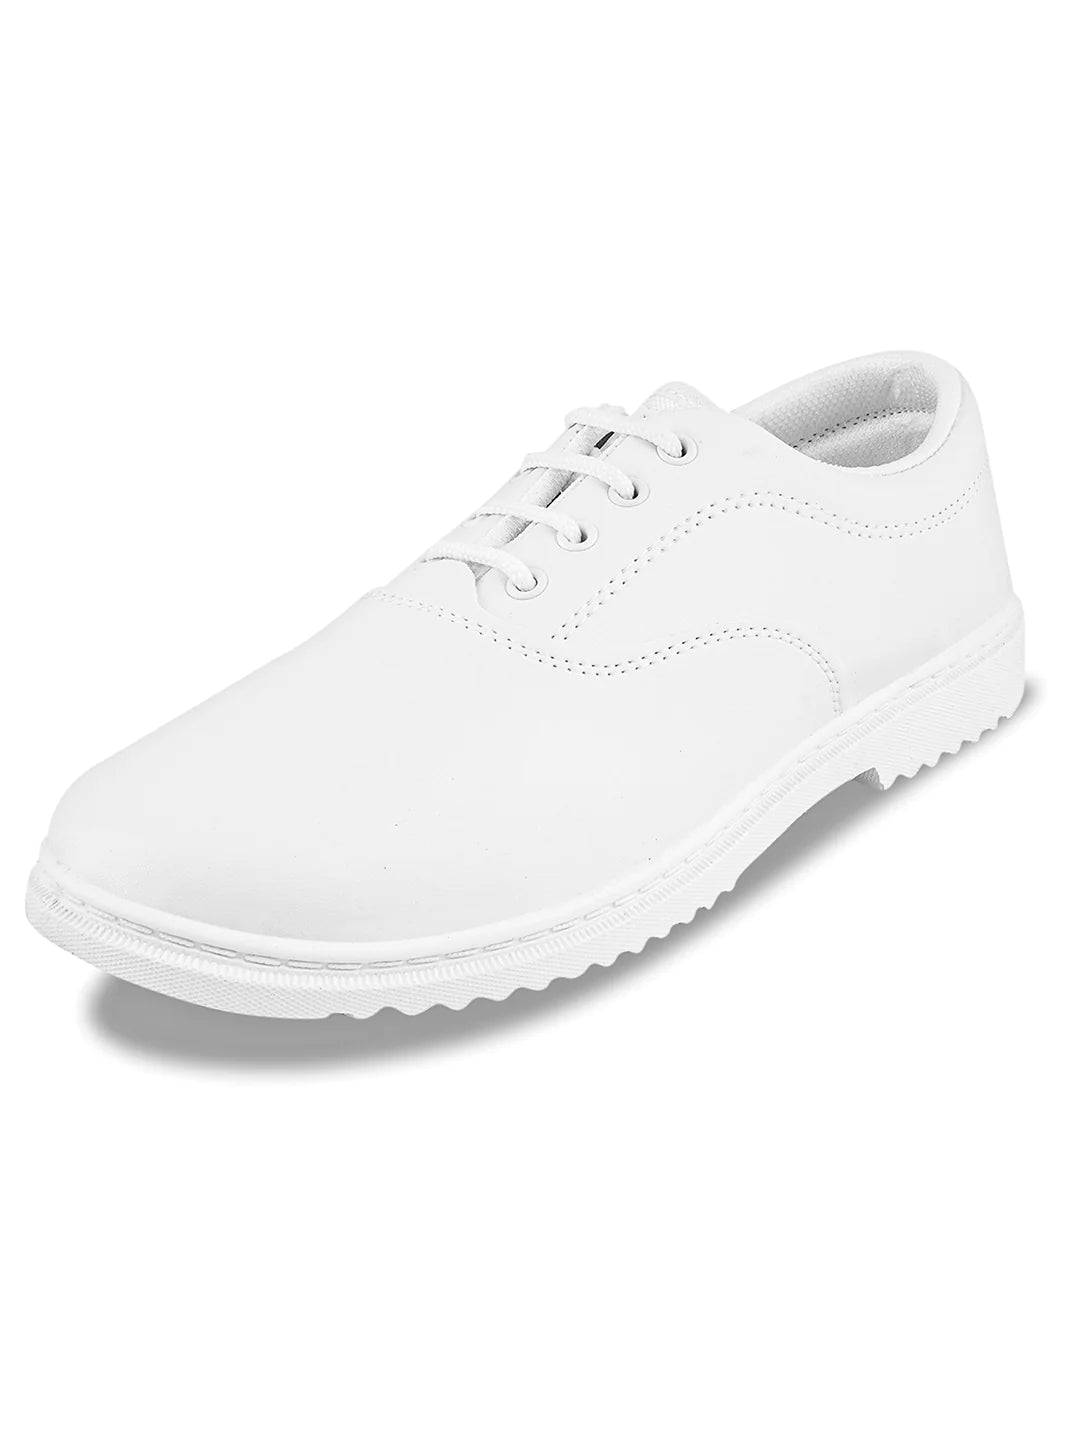 CAMPUS lace Men's School Shoes Running Shoes For Boys & Girls